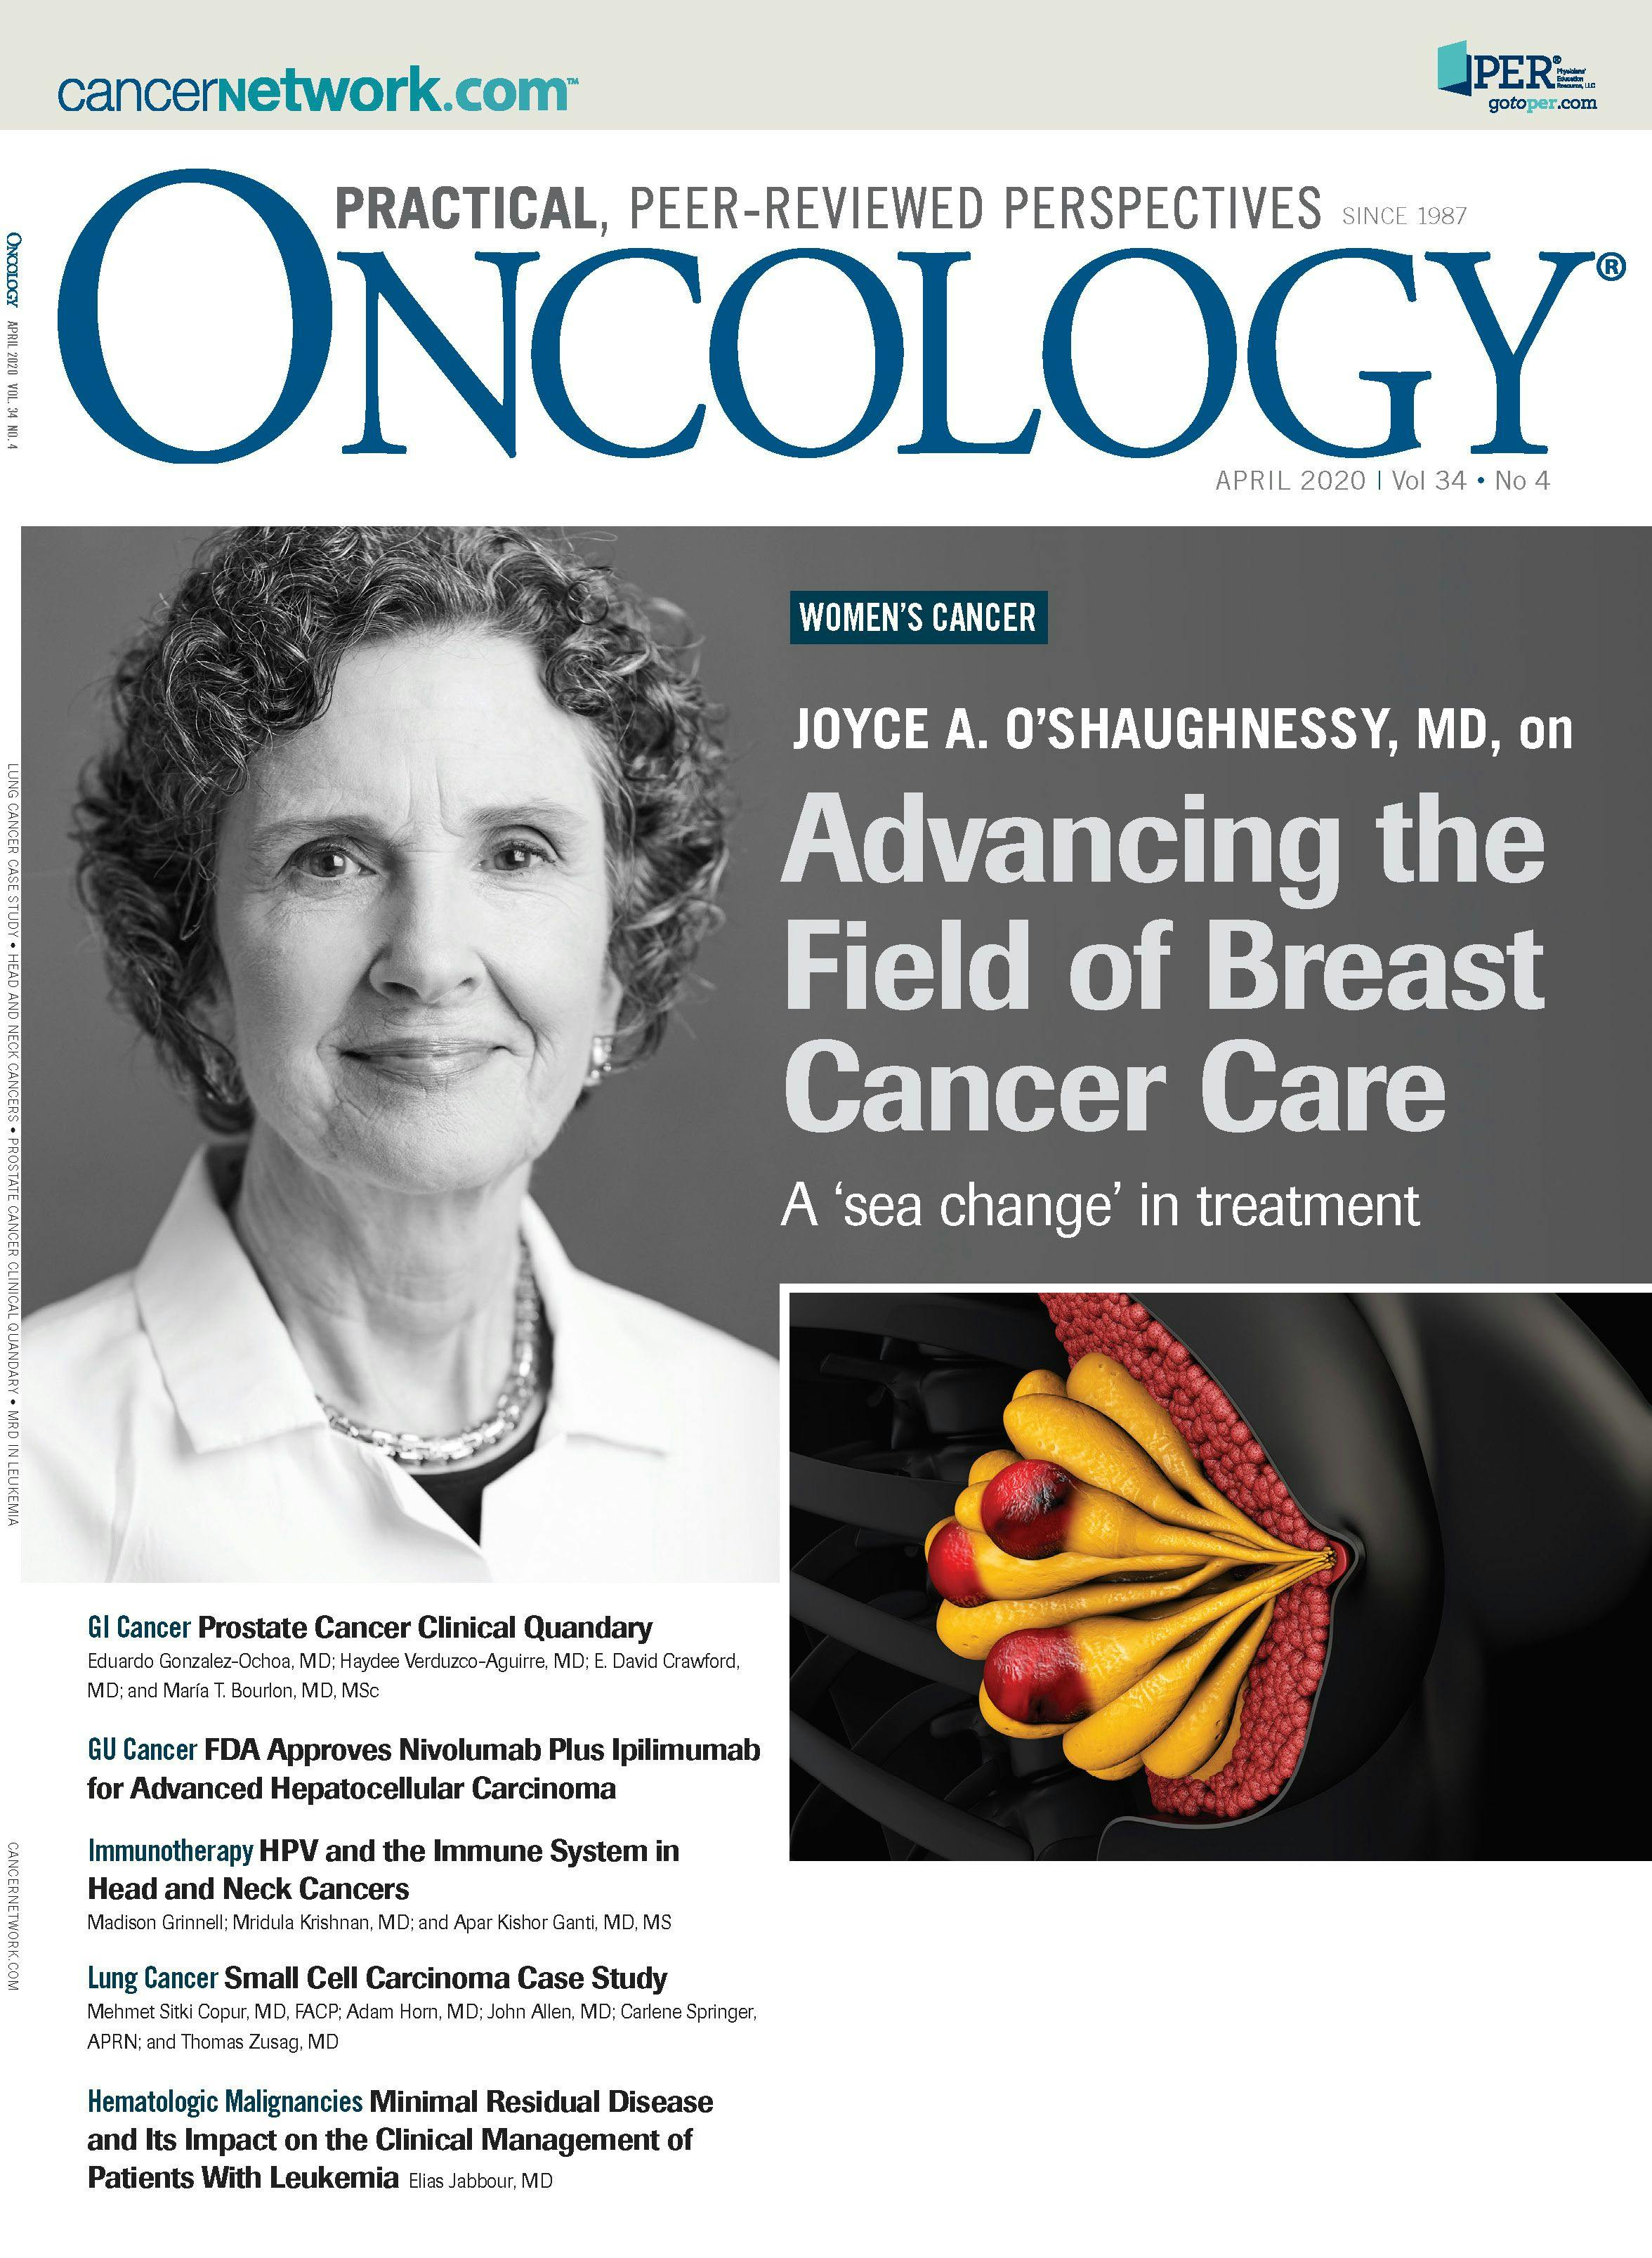 ONCOLOGY Vol 34 Issue 4